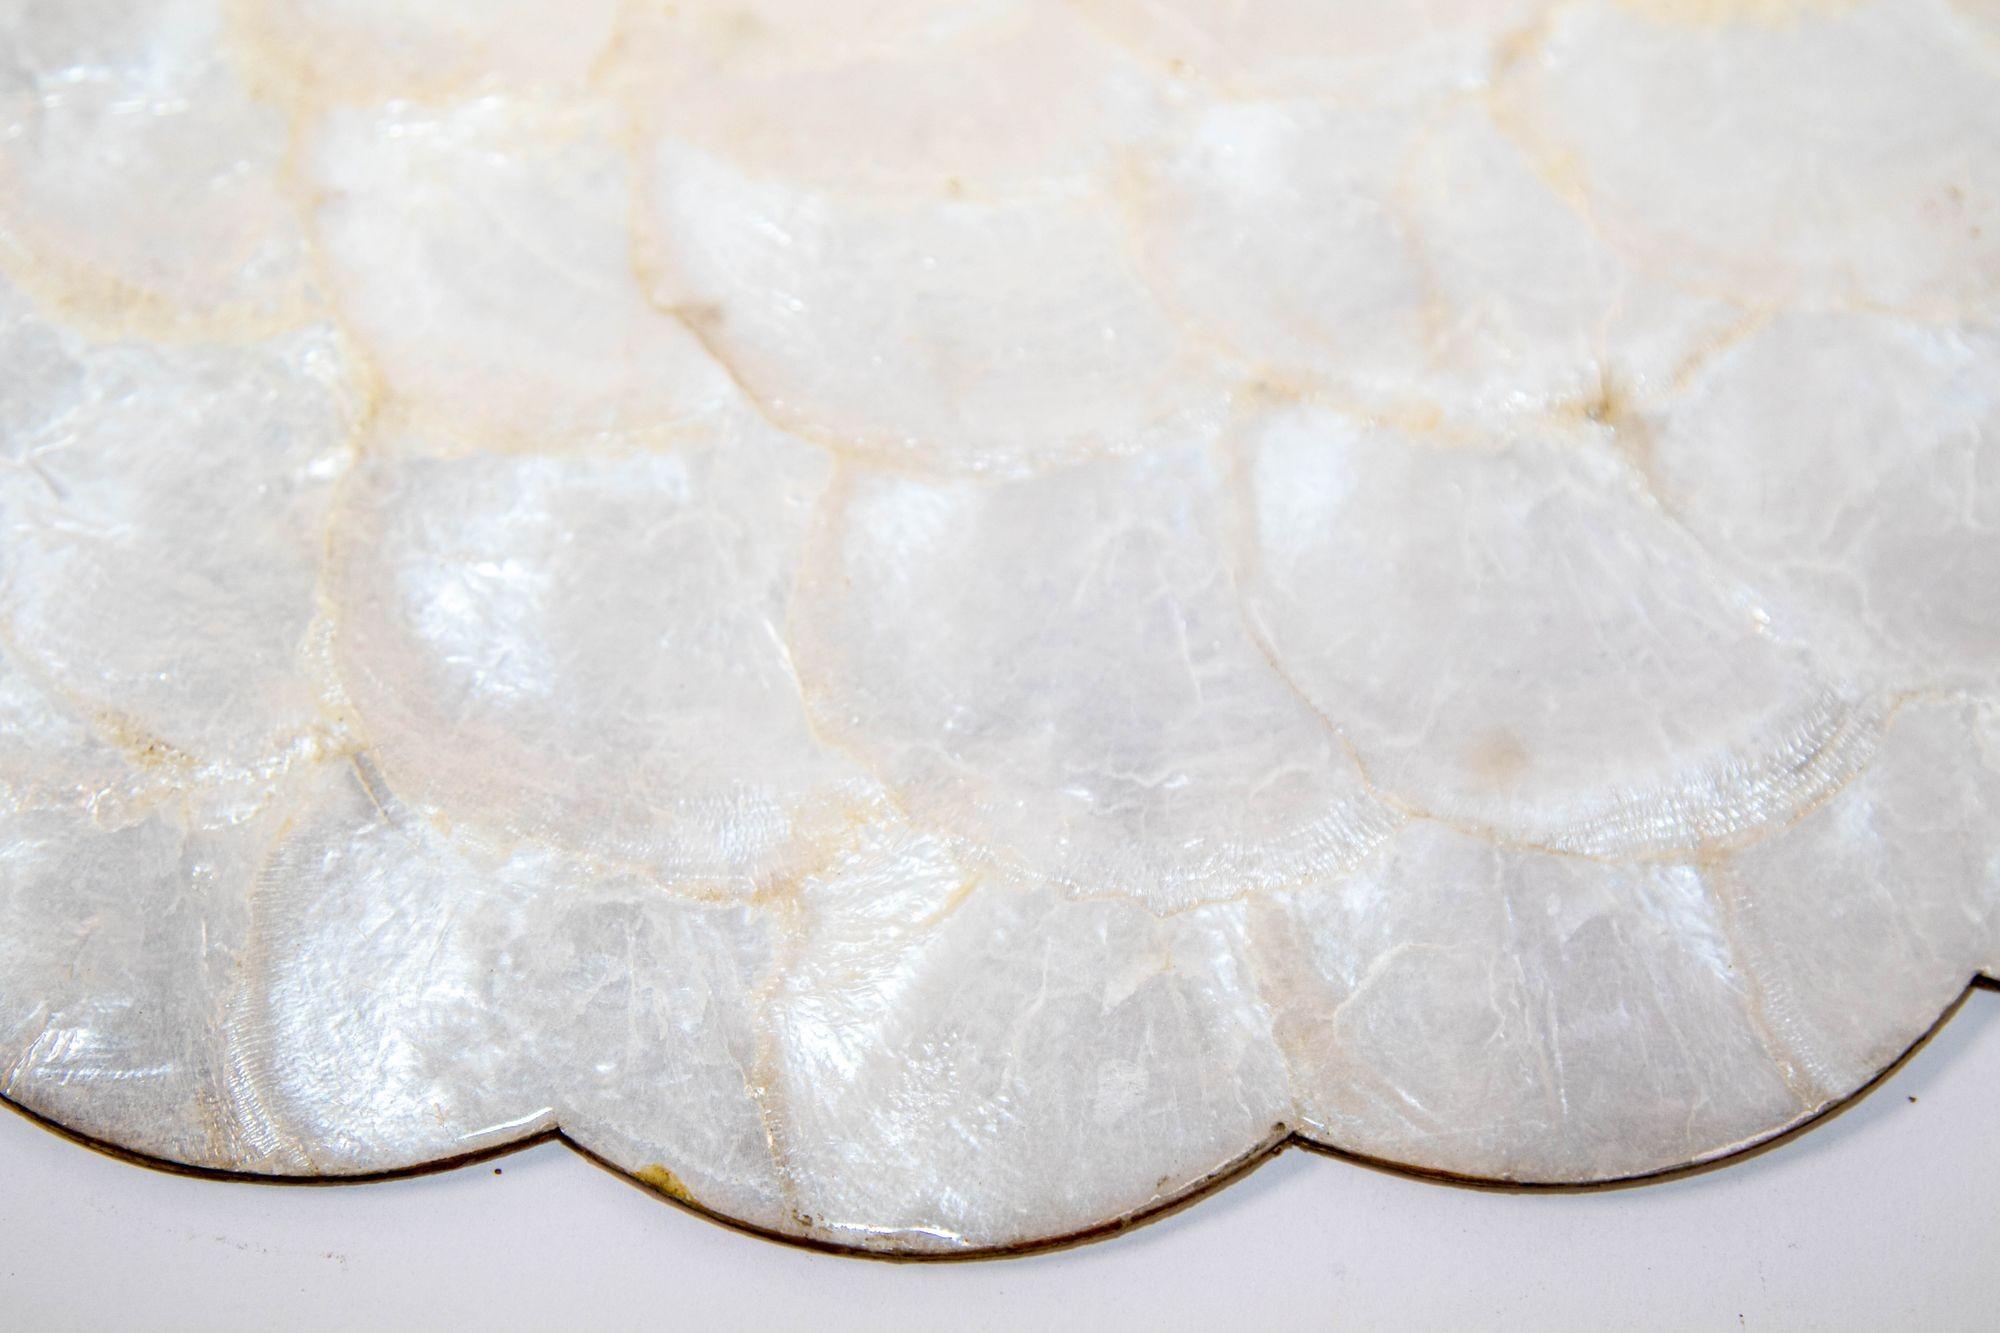 1960s Hallie St Mary 2 Placemats in Natural Capiz Pearl Shell Scalloped Edge 9